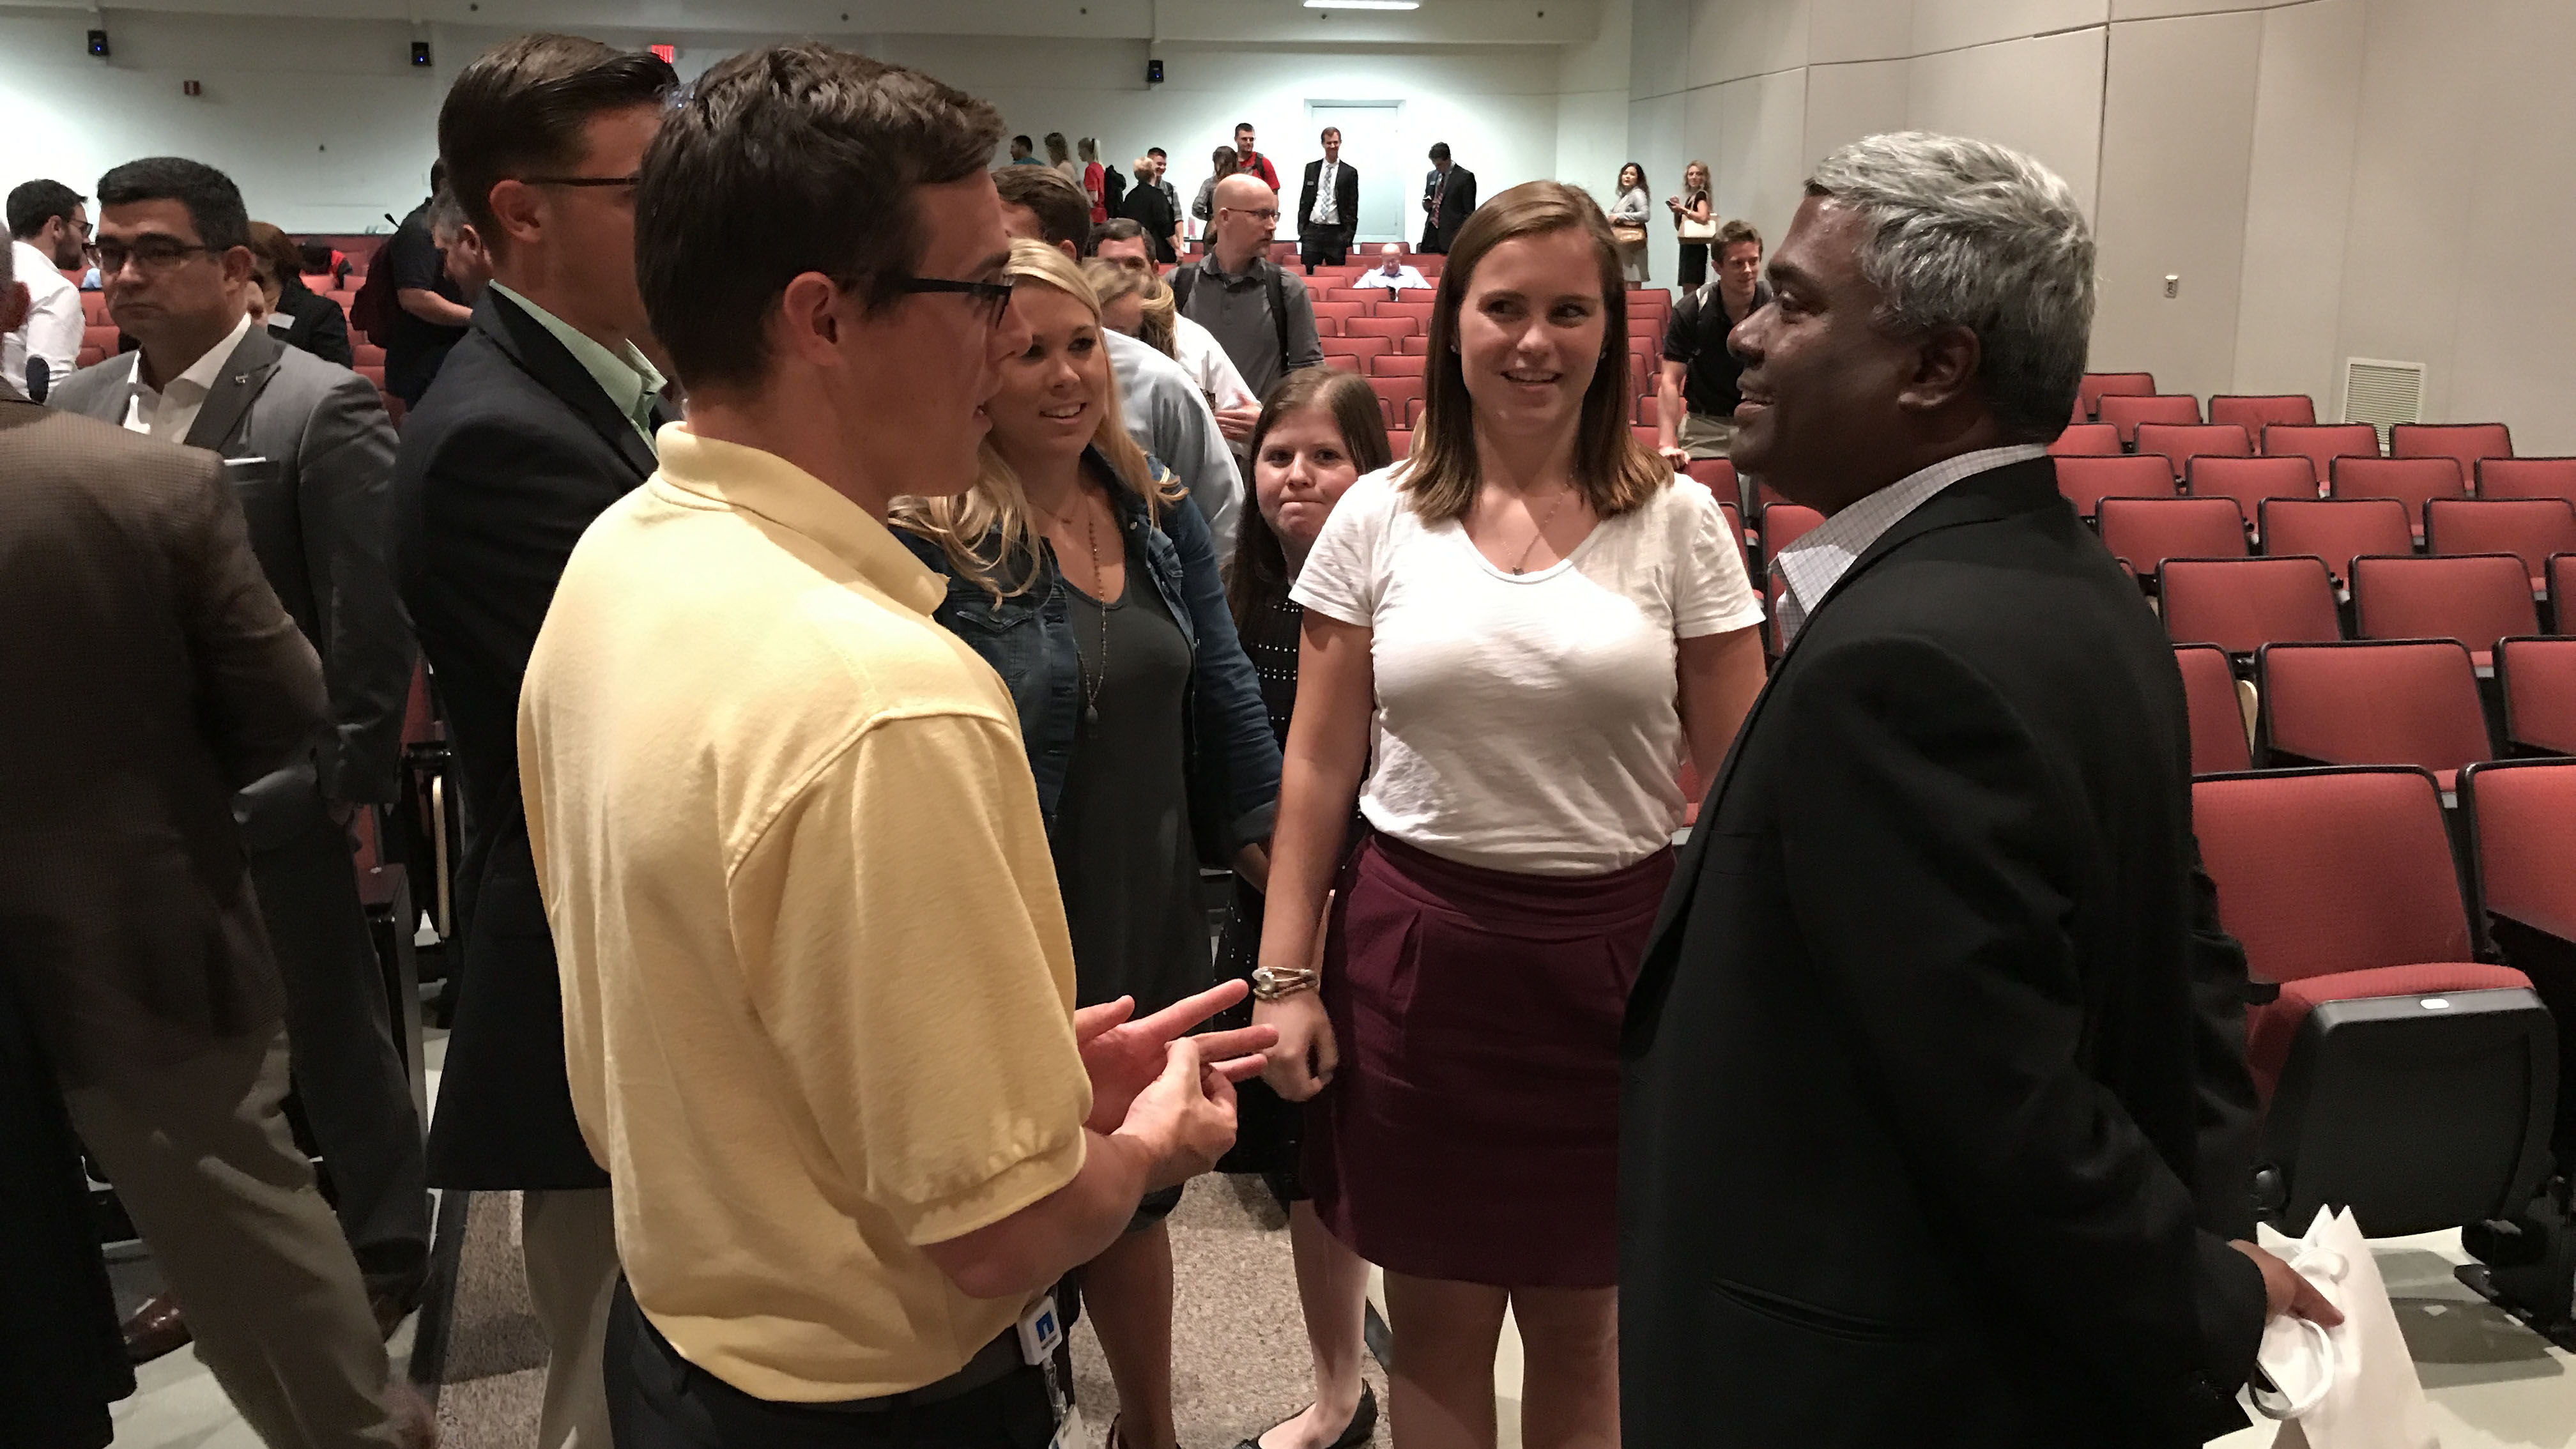 George Kurian, chief executive officer of NetApp, spoke with students and other guests following the NC State Poole College of Management's Executive Leadership Series program on Sept. 20, 2017